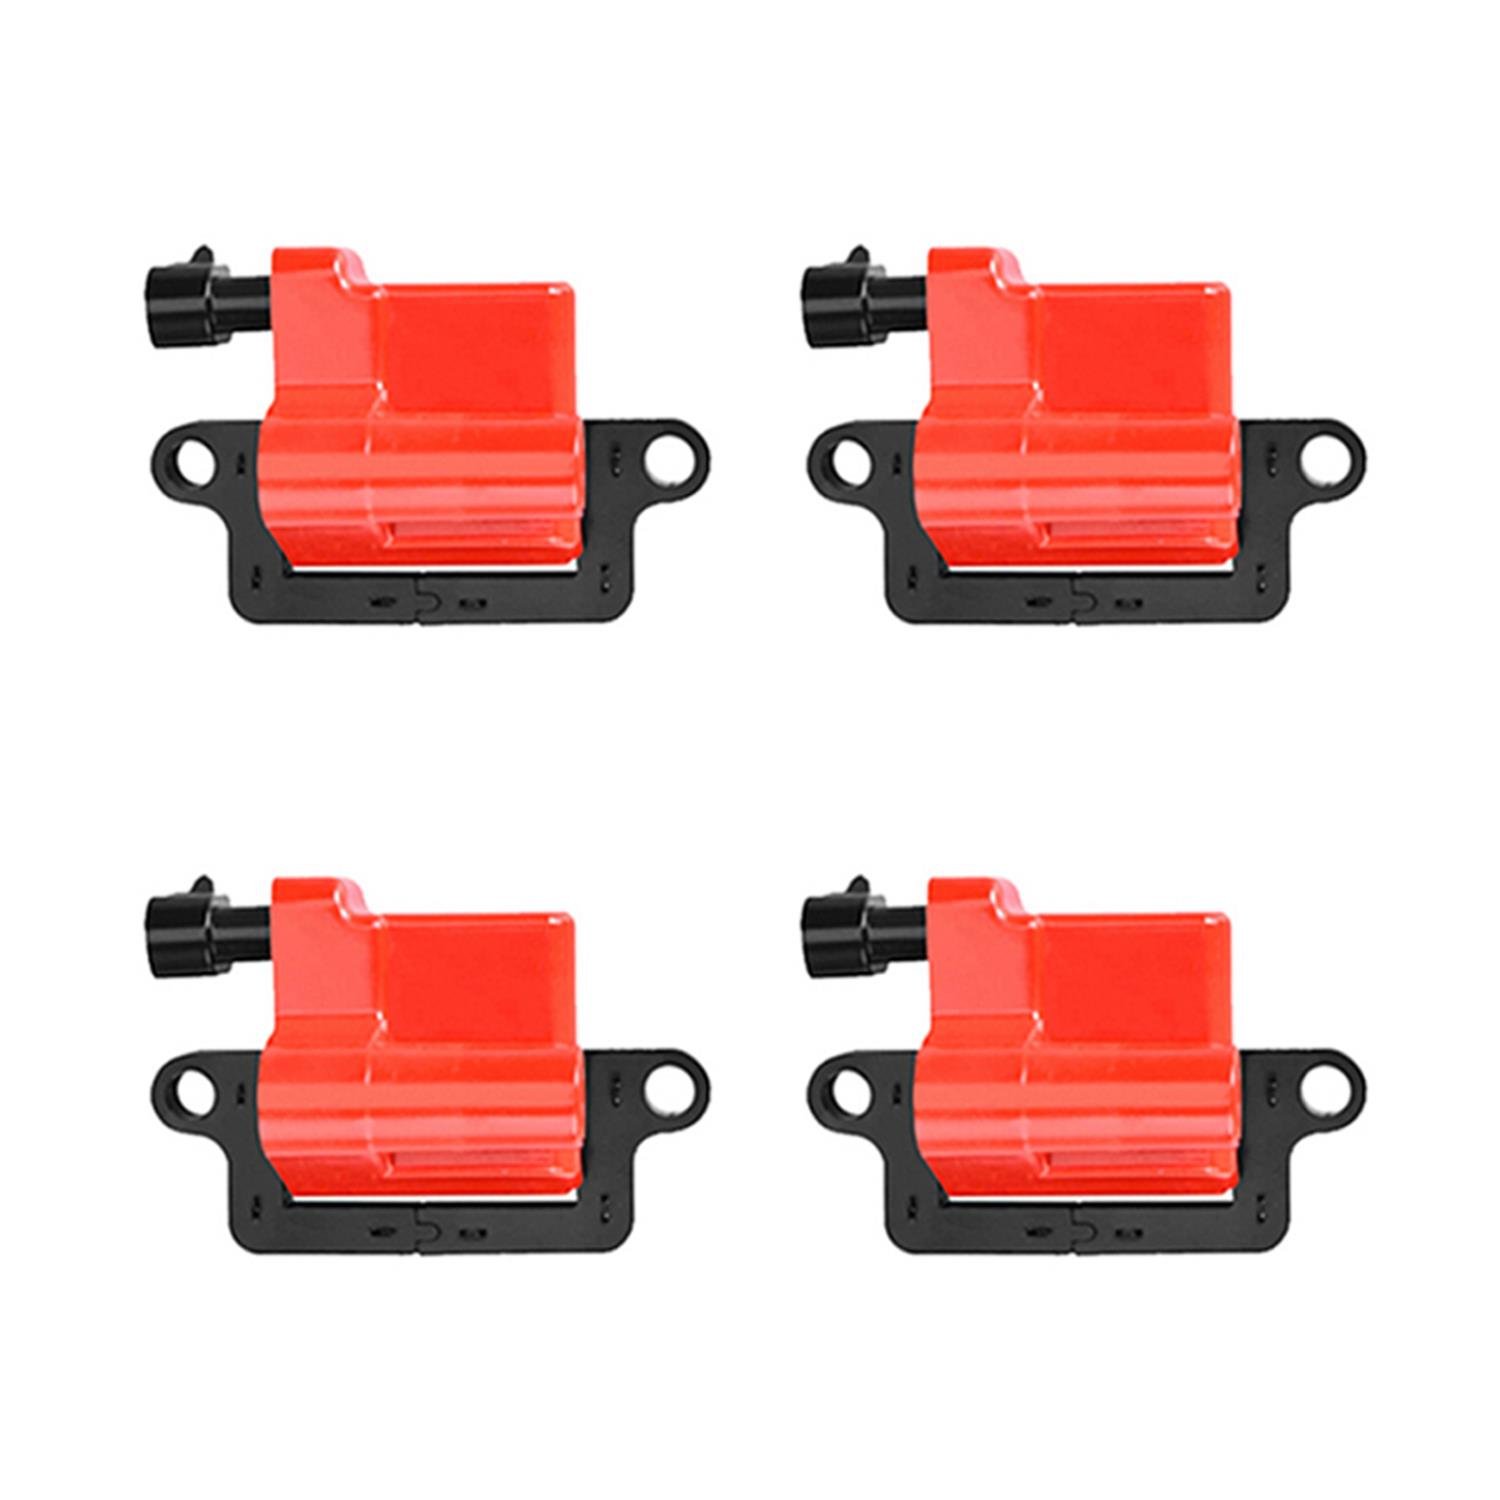 High-Performance Ignition Coils for Chevrolet Tahoe, GMC Yukon [Red]